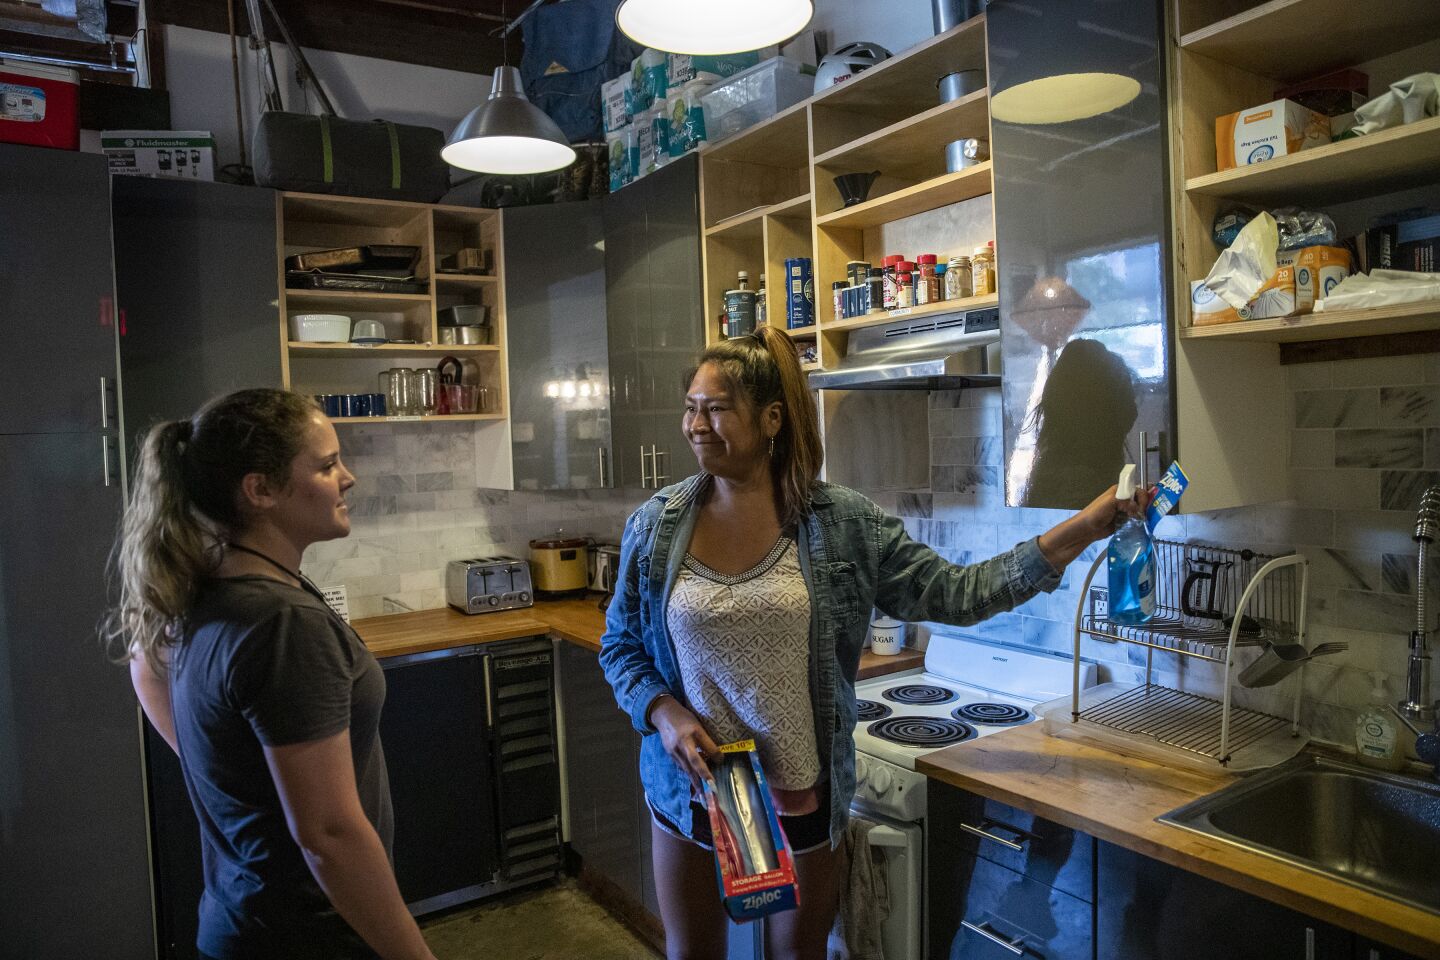 LOS ANGELES, CALIF. -- FRIDAY, OCTOBER 4, 2019: German tourist Lilly Geyer, 22, left, chats with front desk receptionist Blosson Manuel, right, in the common kitchen at PodShare Los Feliz in Los Angeles, Calif., on Oct. 4, 2019. (Brian van der Brug / Los Angeles Times)